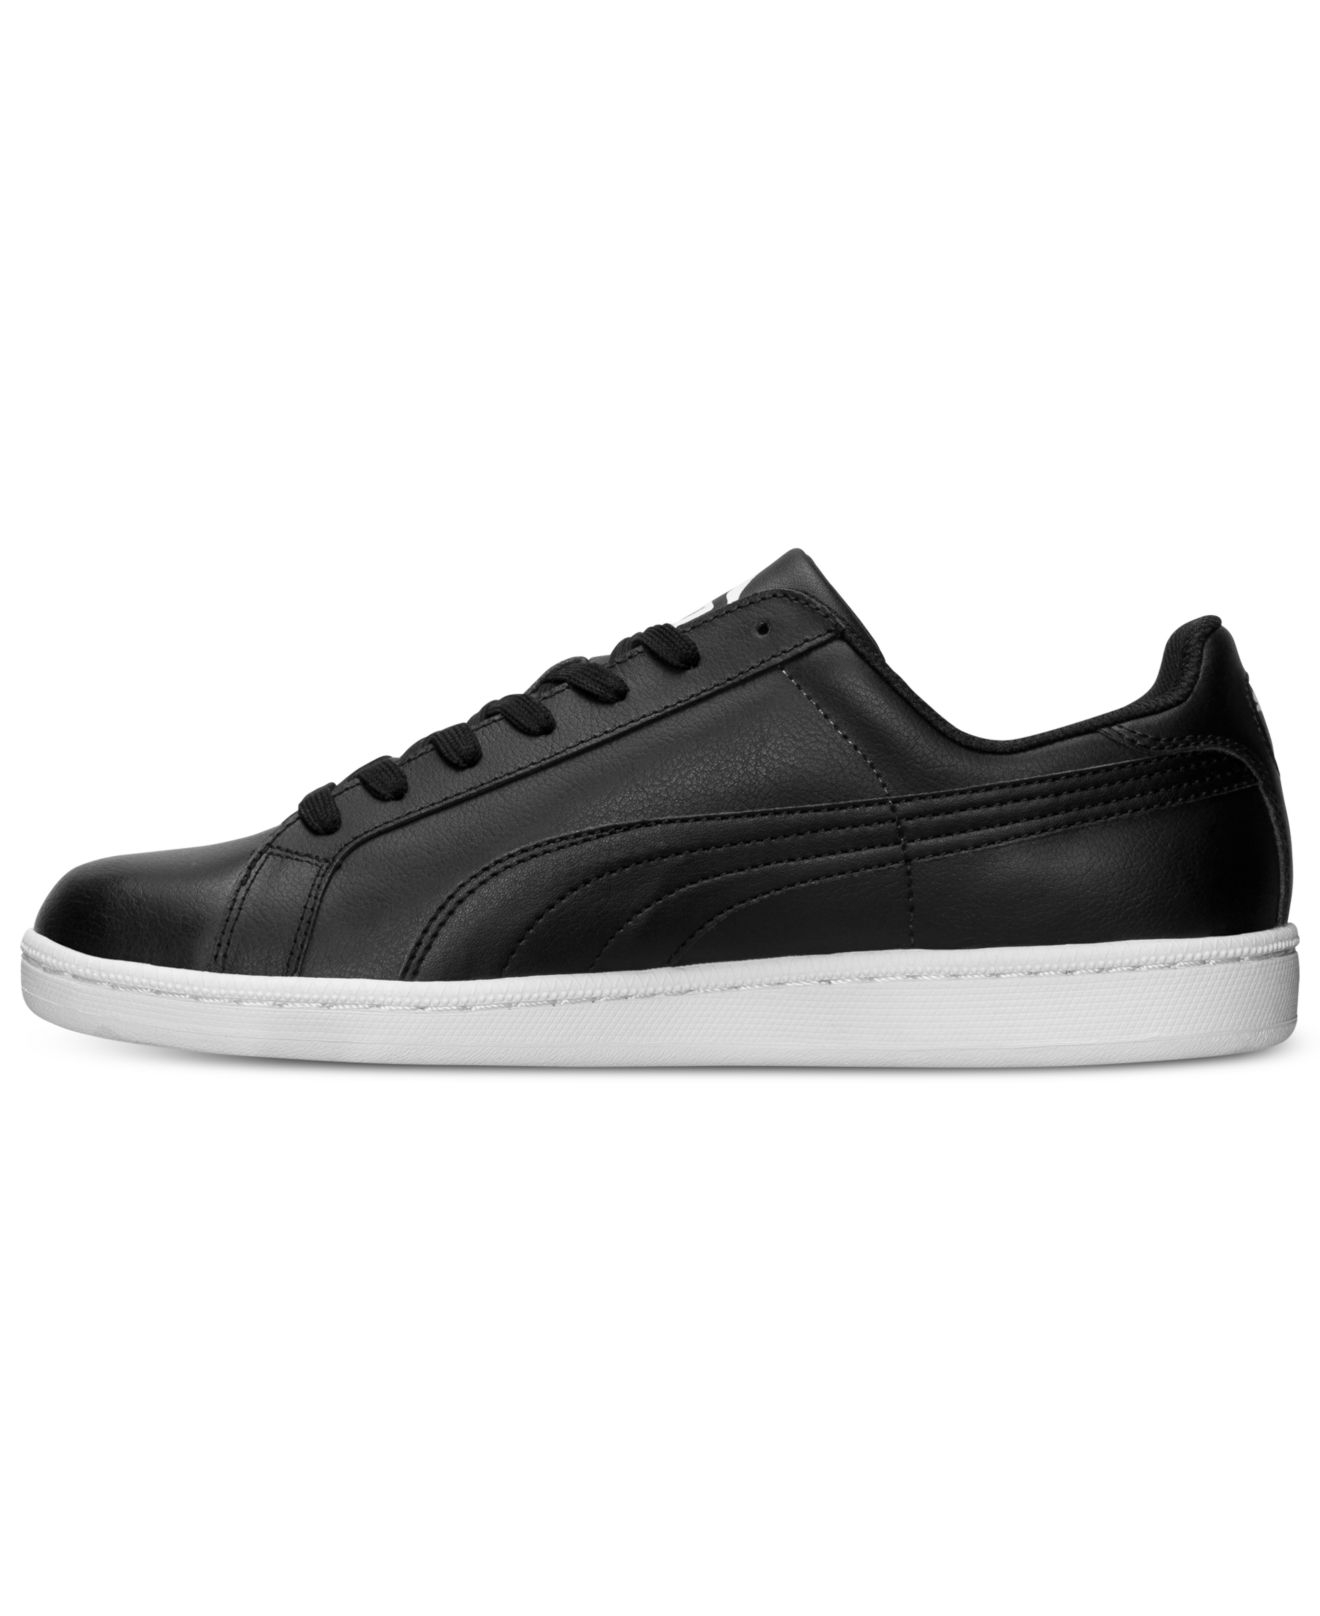 puma black shoes with white sole